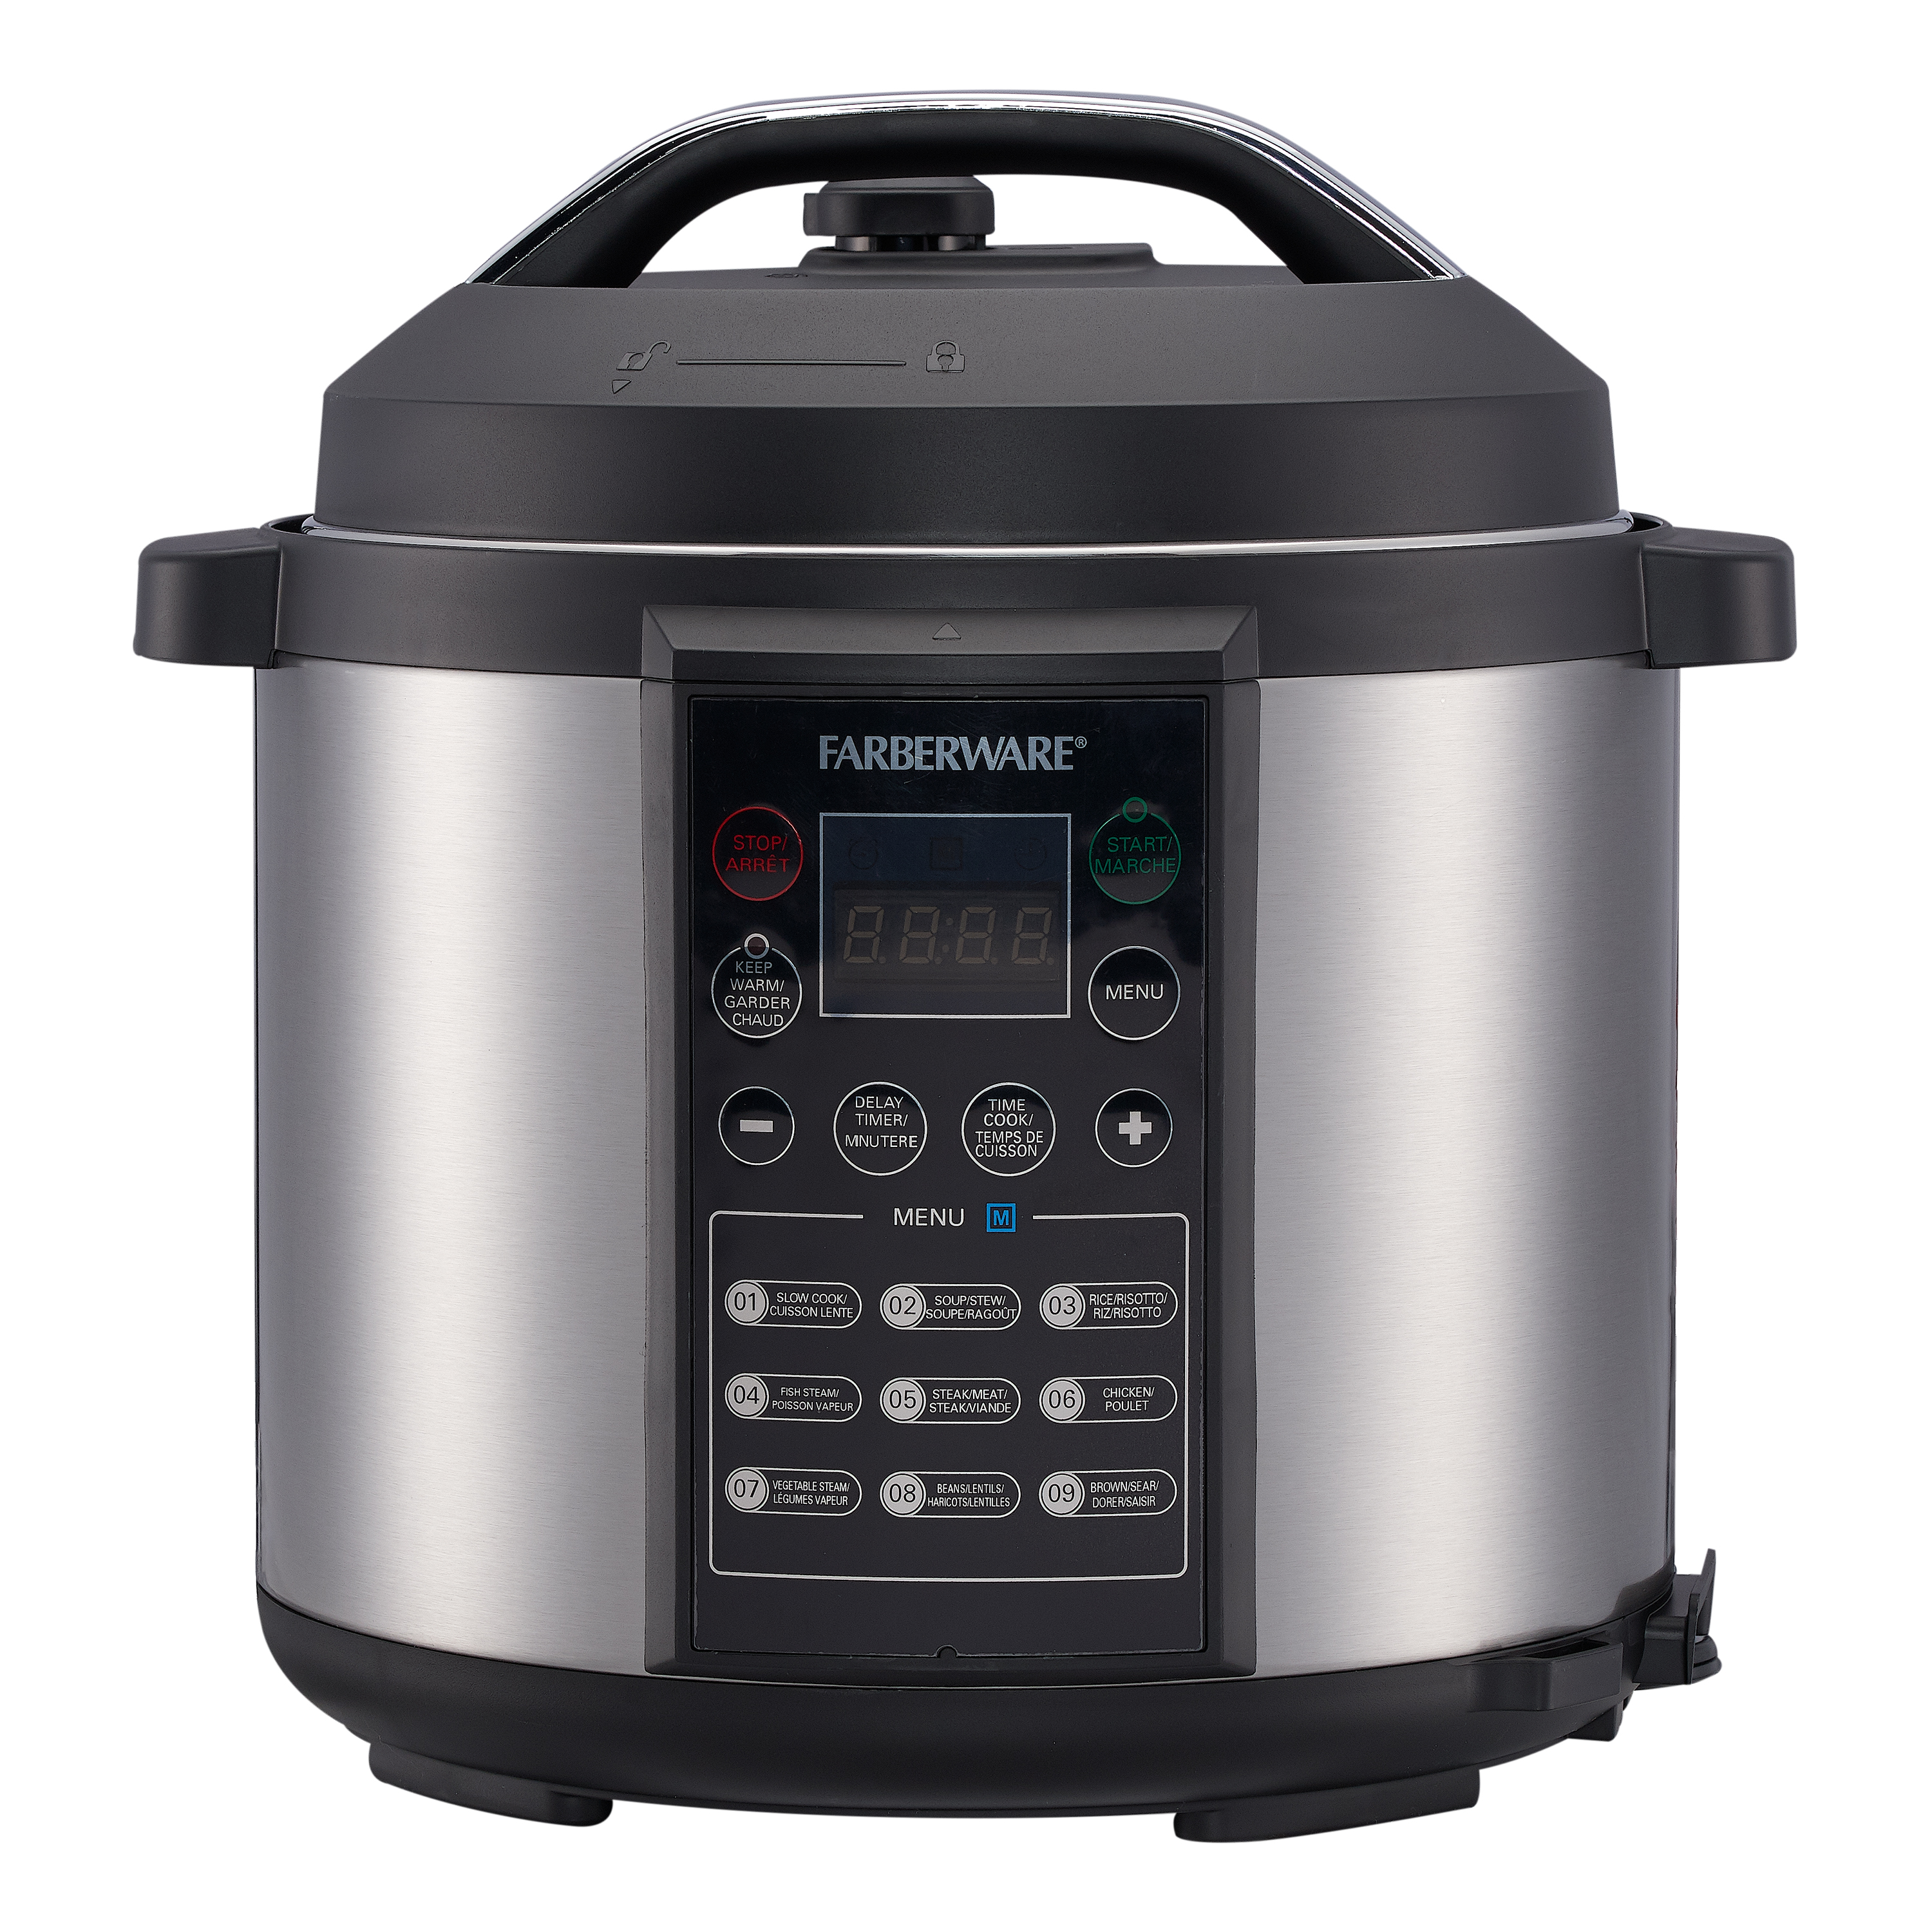 Electric Pressure Cooker Buying Guide - From Val's Kitchen